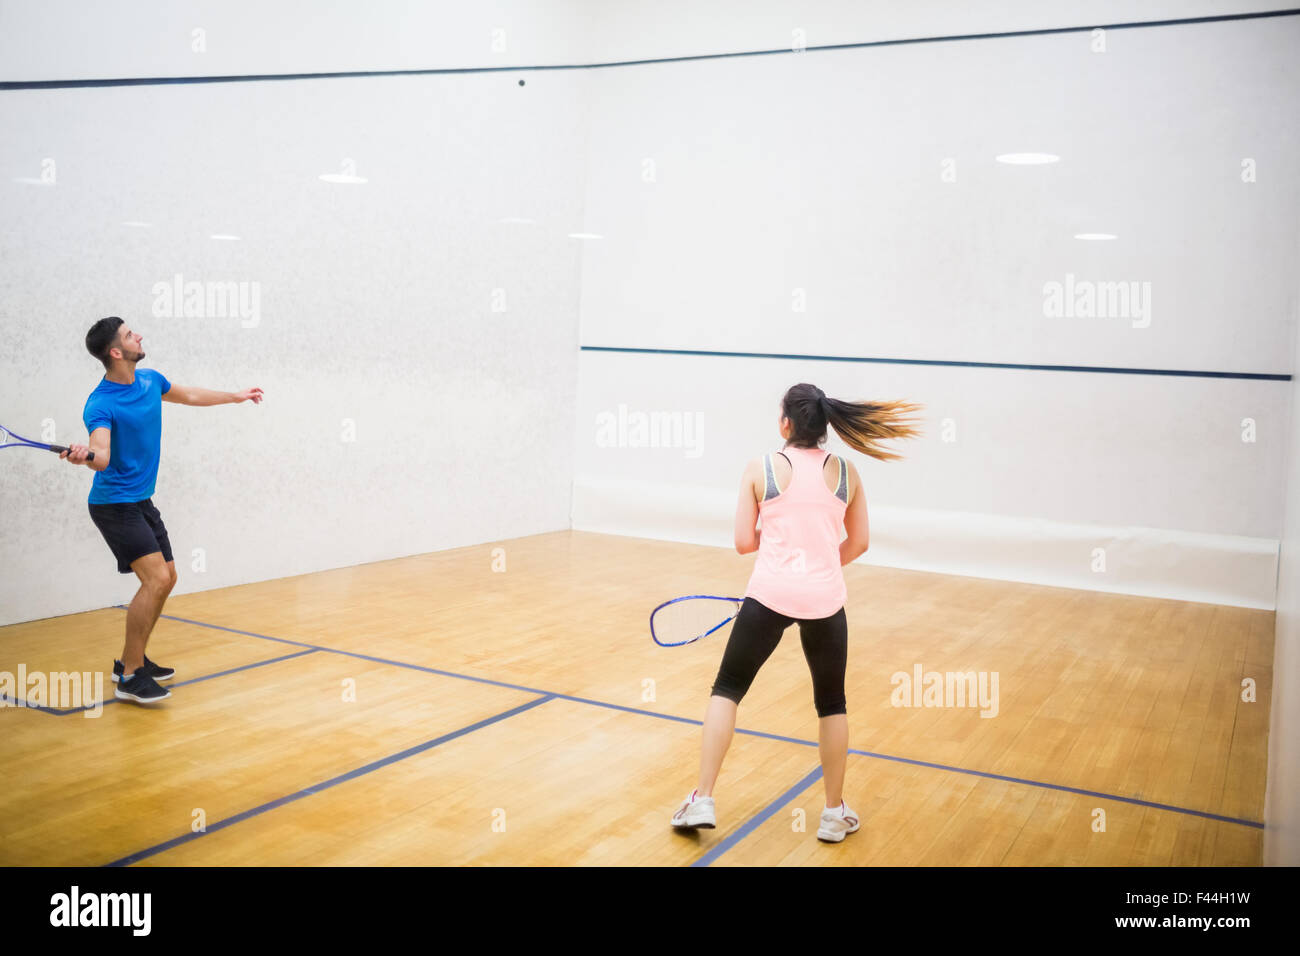 Competitive couple playing squash together Stock Photo